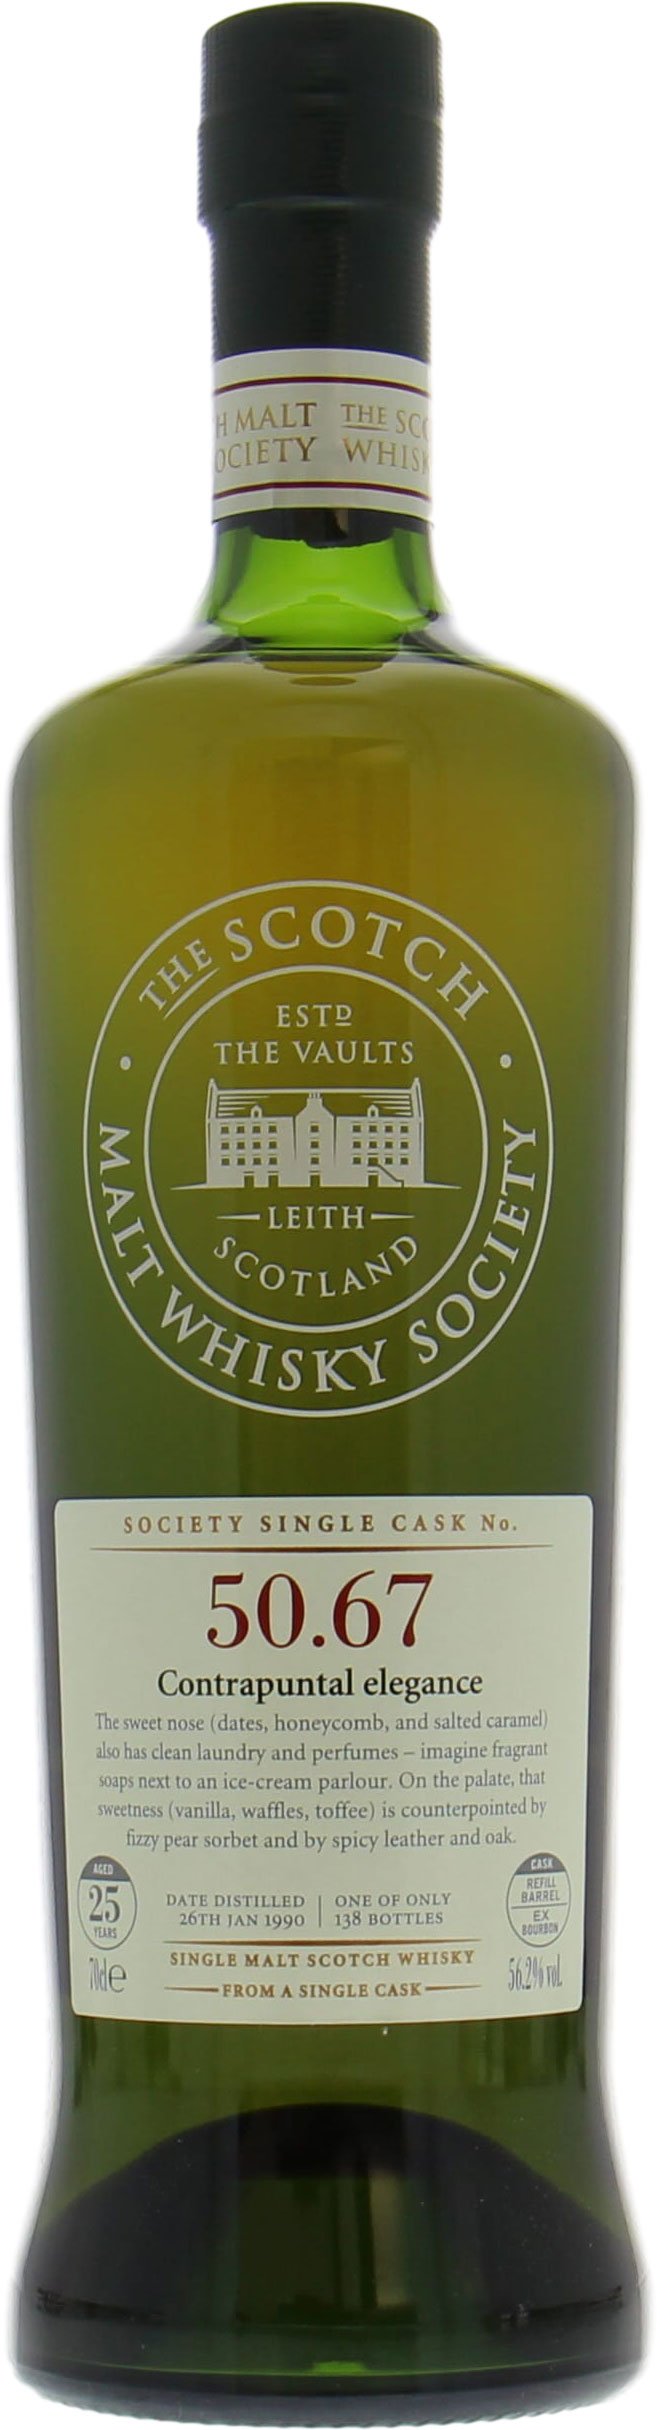 Bladnoch - 25 Years Old SMWS 50.67 Contrapuntal elegance 56.2% 1990 Perfect